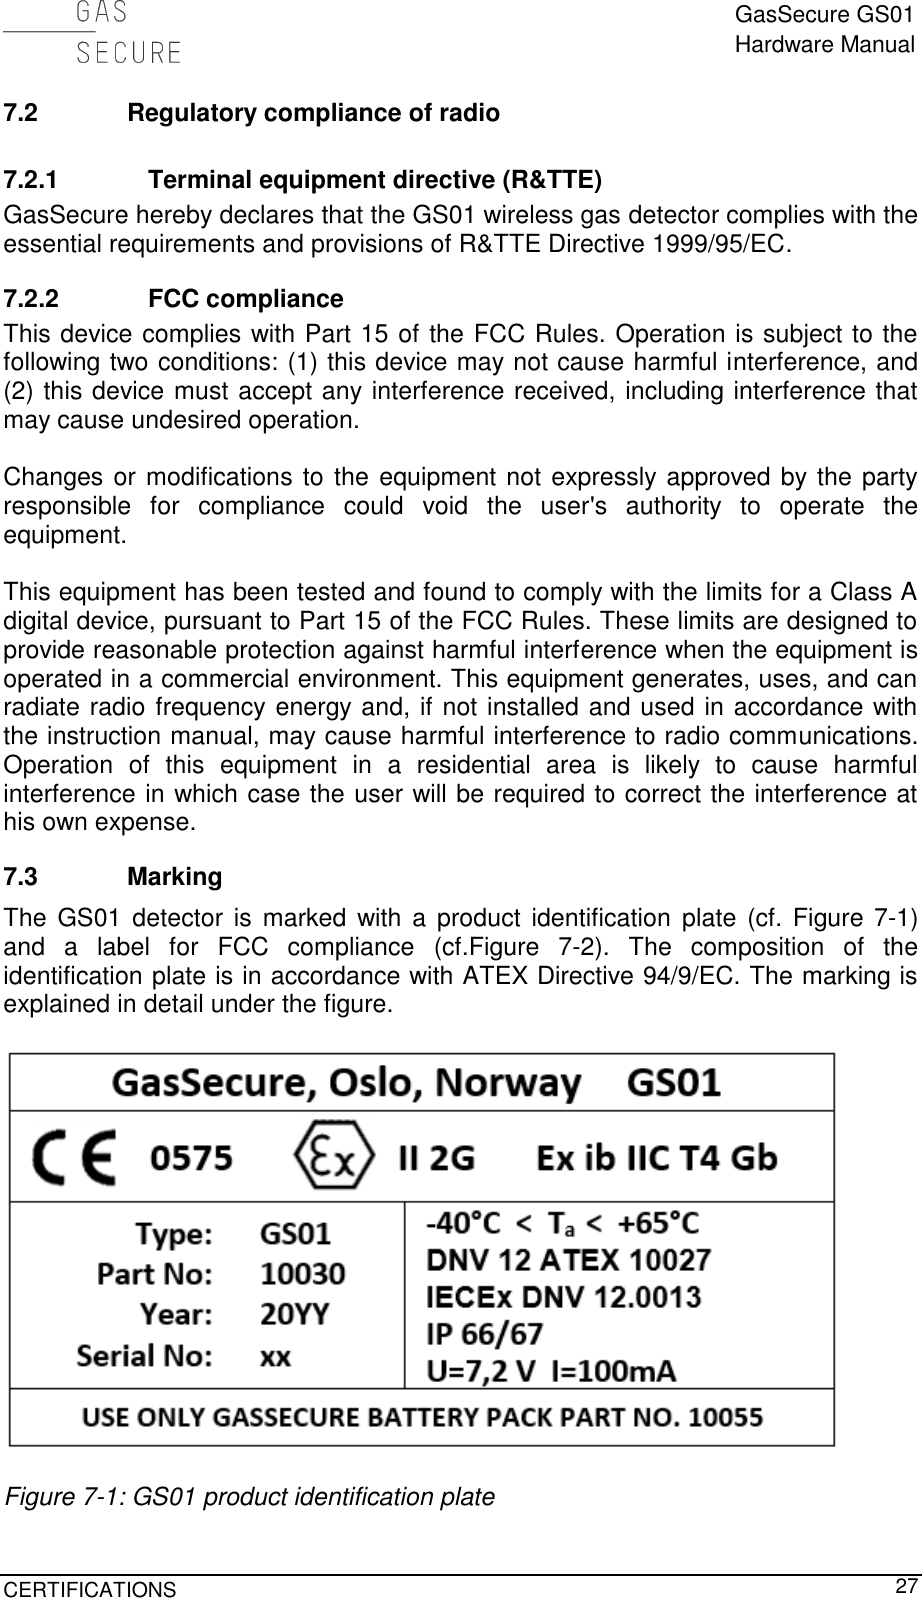  GasSecure GS01 Hardware Manual  CERTIFICATIONS     27 7.2 Regulatory compliance of radio 7.2.1 Terminal equipment directive (R&amp;TTE) GasSecure hereby declares that the GS01 wireless gas detector complies with the essential requirements and provisions of R&amp;TTE Directive 1999/95/EC. 7.2.2 FCC compliance This device complies with Part 15 of the FCC Rules. Operation is subject to the following two conditions: (1) this device may not cause harmful interference, and (2) this device must accept any interference received, including interference that may cause undesired operation.  Changes or modifications to the equipment not expressly approved by the party responsible  for  compliance  could  void  the  user&apos;s  authority  to  operate  the equipment.  This equipment has been tested and found to comply with the limits for a Class A digital device, pursuant to Part 15 of the FCC Rules. These limits are designed to provide reasonable protection against harmful interference when the equipment is operated in a commercial environment. This equipment generates, uses, and can radiate radio frequency energy and, if not installed and used in accordance with the instruction manual, may cause harmful interference to radio communications. Operation  of  this  equipment  in  a  residential  area  is  likely  to  cause  harmful interference in which case the user will be required to correct the interference at his own expense. 7.3 Marking The  GS01  detector is marked  with a  product  identification  plate (cf.  Figure  7-1) and  a  label  for  FCC  compliance  (cf.Figure  7-2).  The  composition  of  the identification plate is in accordance with ATEX Directive 94/9/EC. The marking is explained in detail under the figure.    Figure 7-1: GS01 product identification plate 